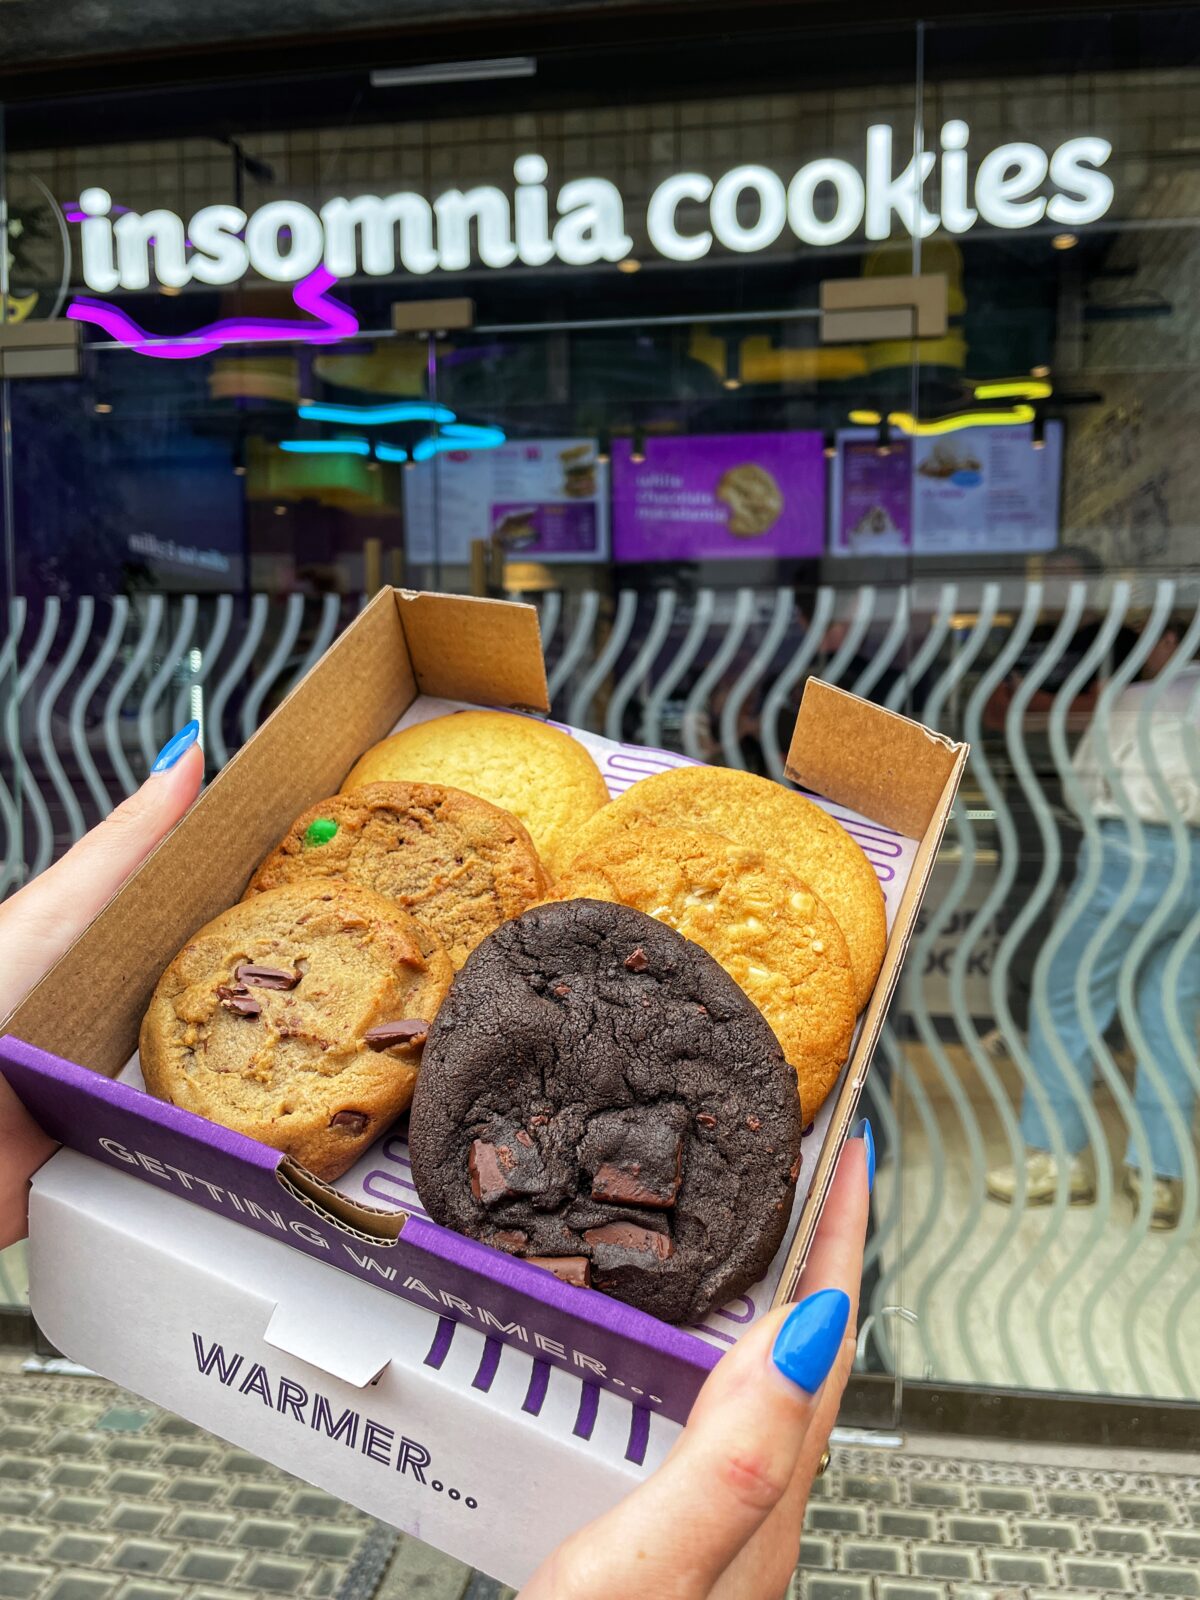 A box of cookies at Insomnia Cookies at Royal Exchange, Cross Street, Manchester. Credit: The Manc Group